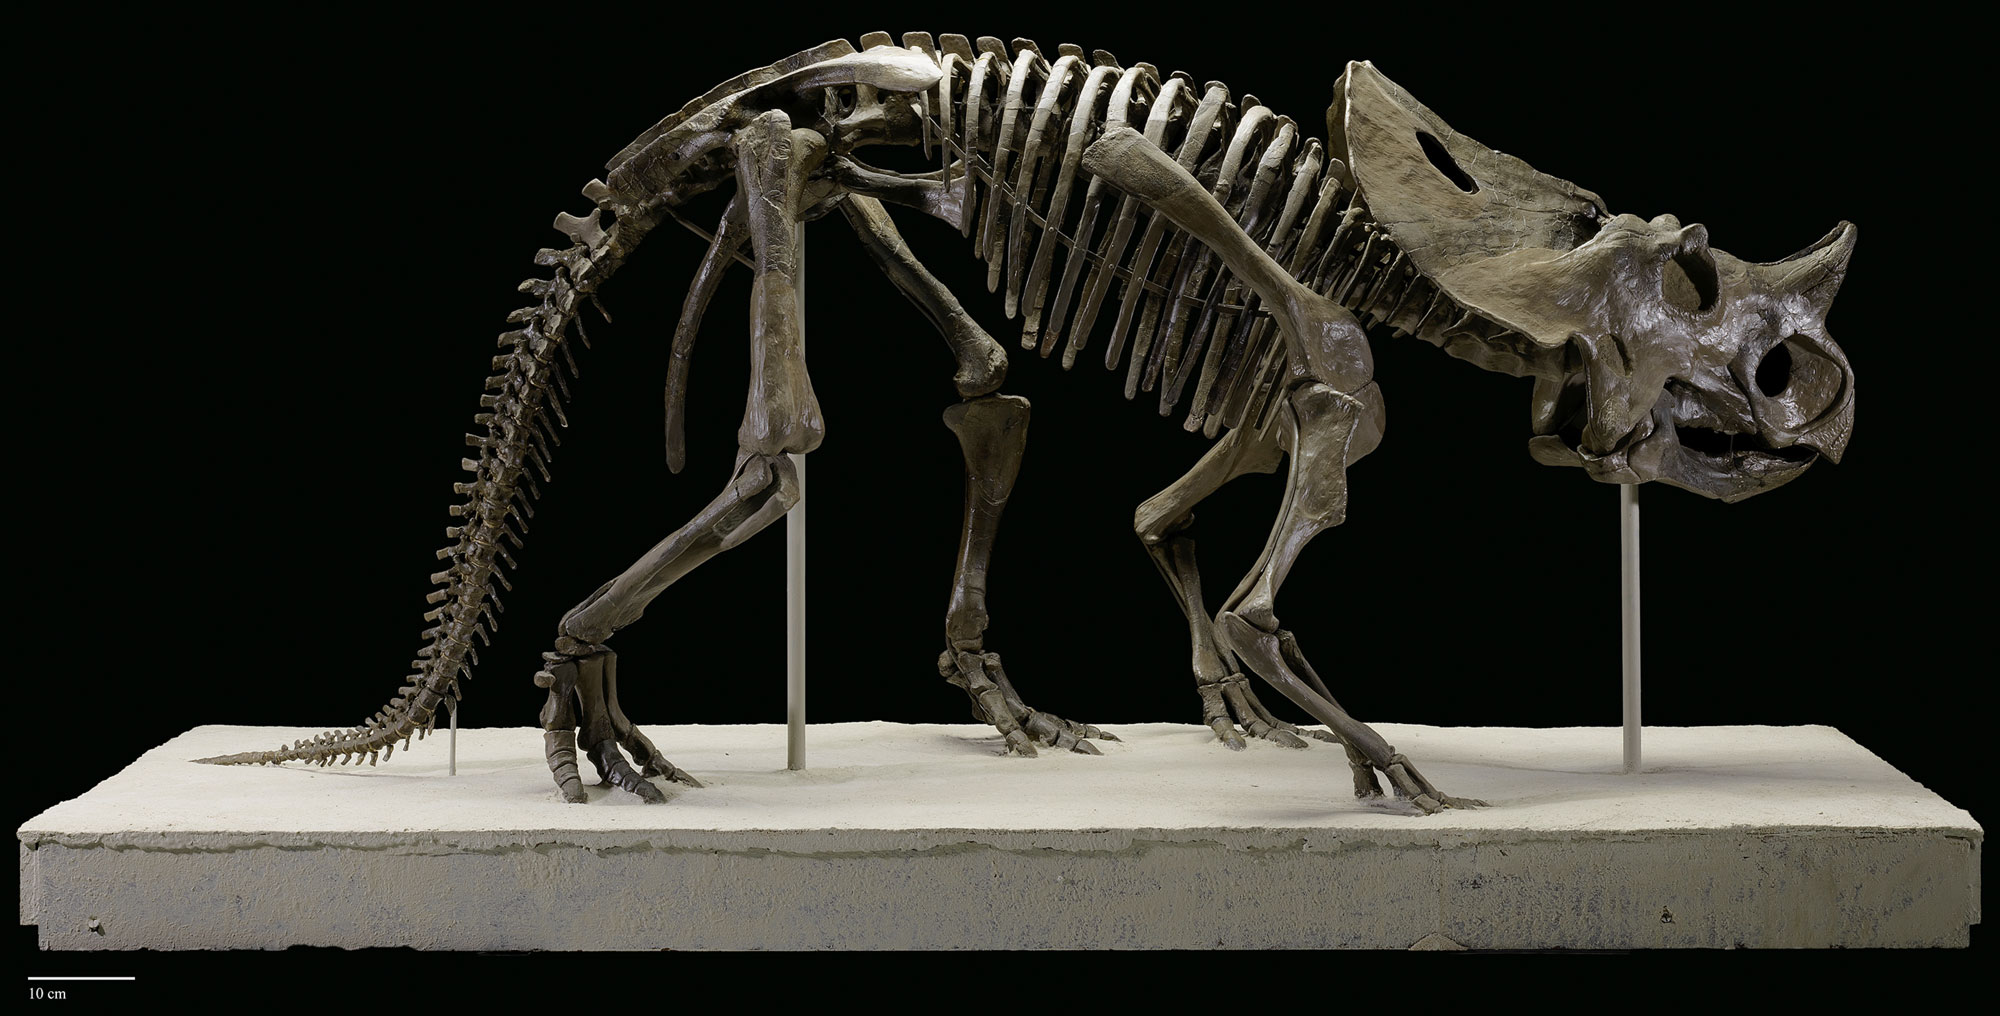 Photograph of a mounted skeleton of the horned dinosaur Brachyceratops from the Cretaceous Two Medicine Formation of Montana against a black backdrop. The photo shows a relatively small dinosaur standing on four legs. Its tail is long and drooping, with the tip resting on the ground. The skull as a single large nasal horn, two small bony bumps over the eyes, and a short frill extending backward over the neck. The mouth ends in a bony beak.